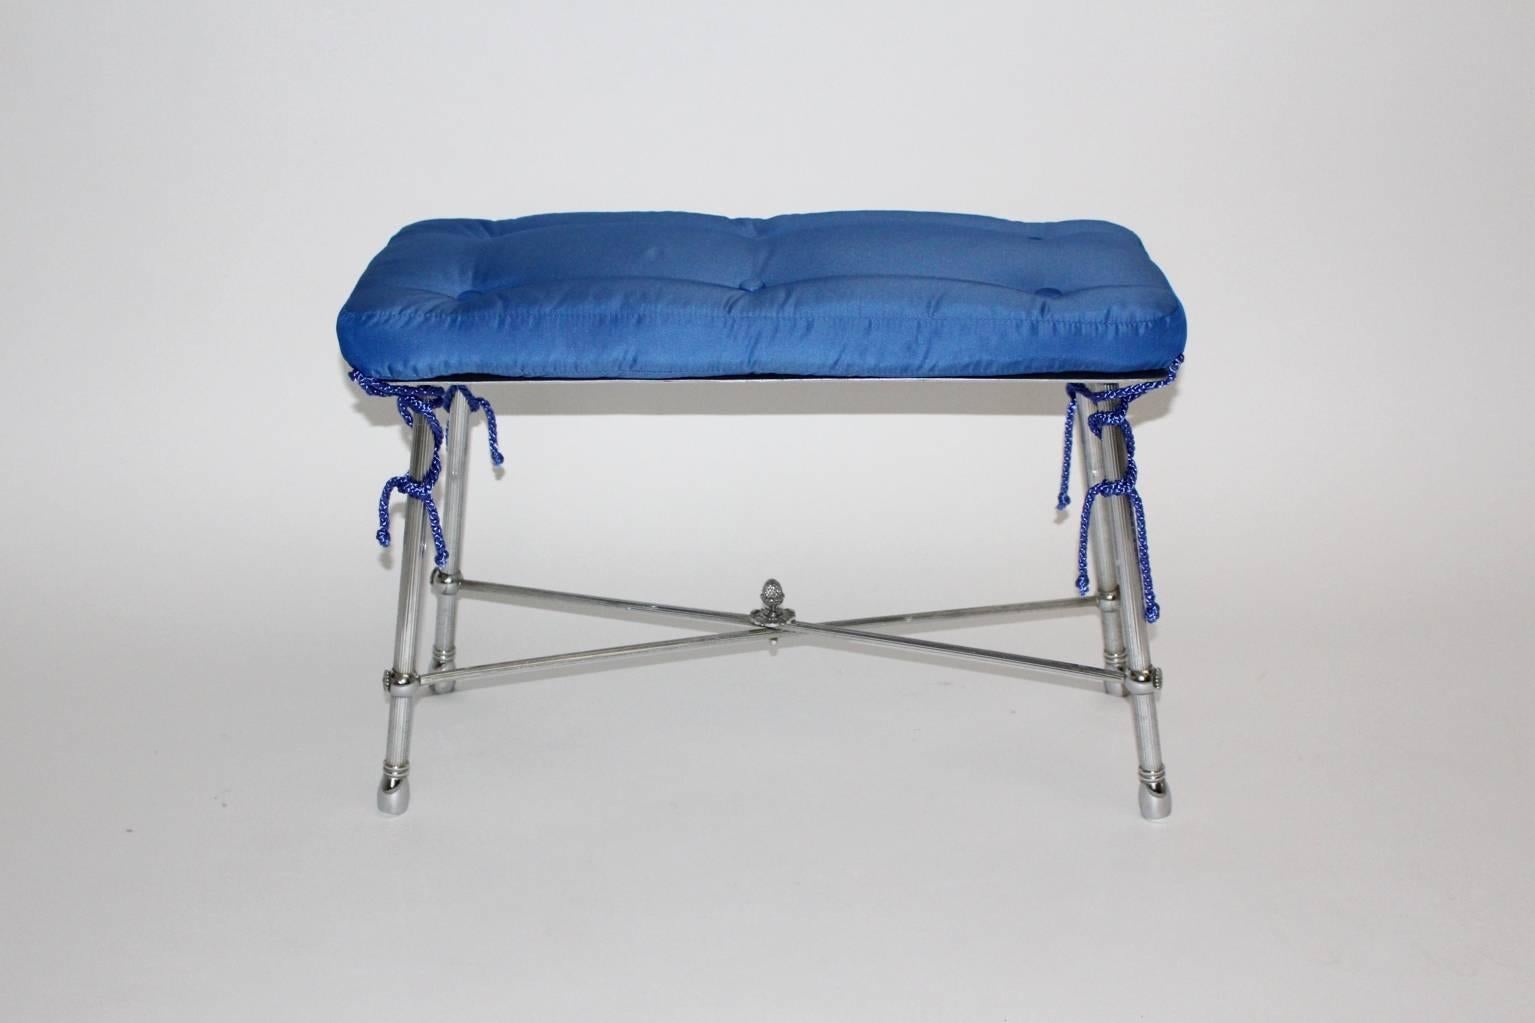 Mid century Modern metal vintage bench attributed to Maison Jansen, which is nickel-plated and polished. Renewed loose cushion covered with blue textile fabric and blue cords.
Very good condition
All measures are approximate.